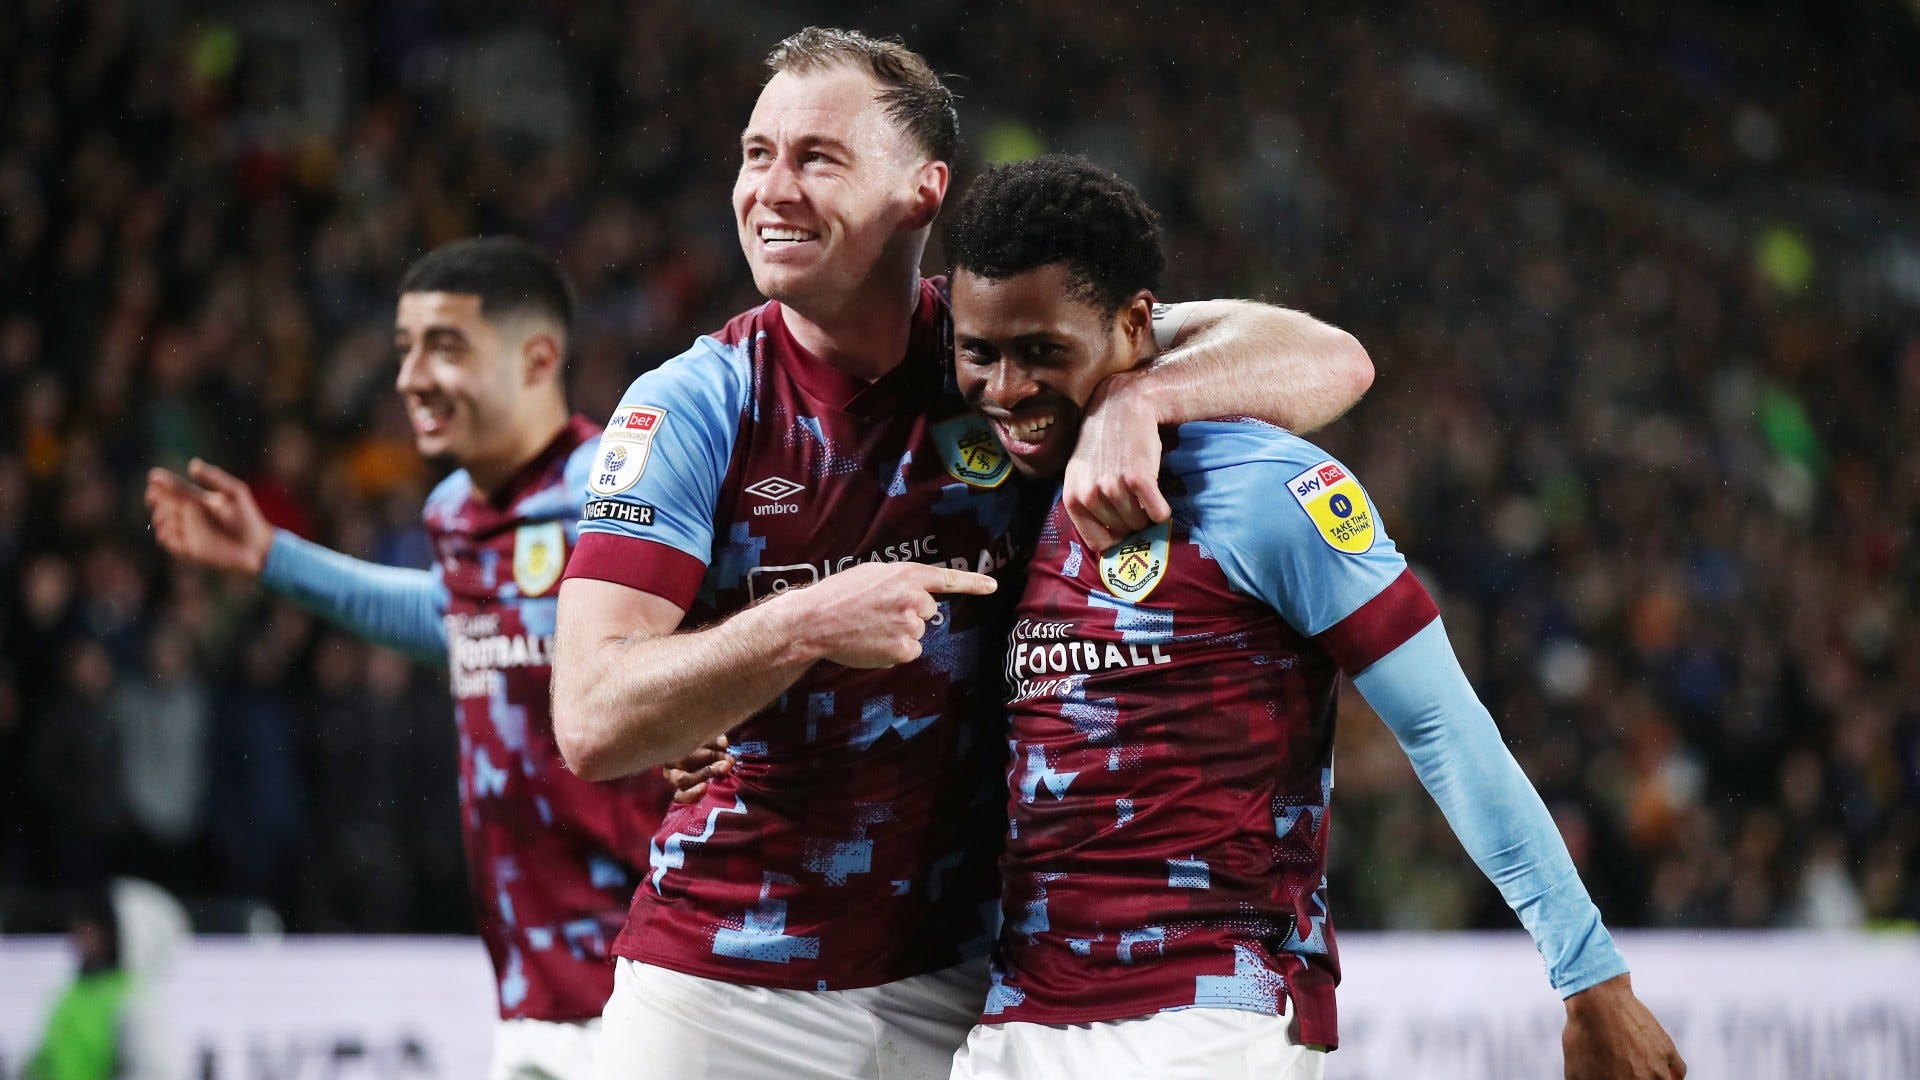 Blackburn Rovers vs Burnley Where to watch the match online, live stream, TV channels and kick-off time Goal US